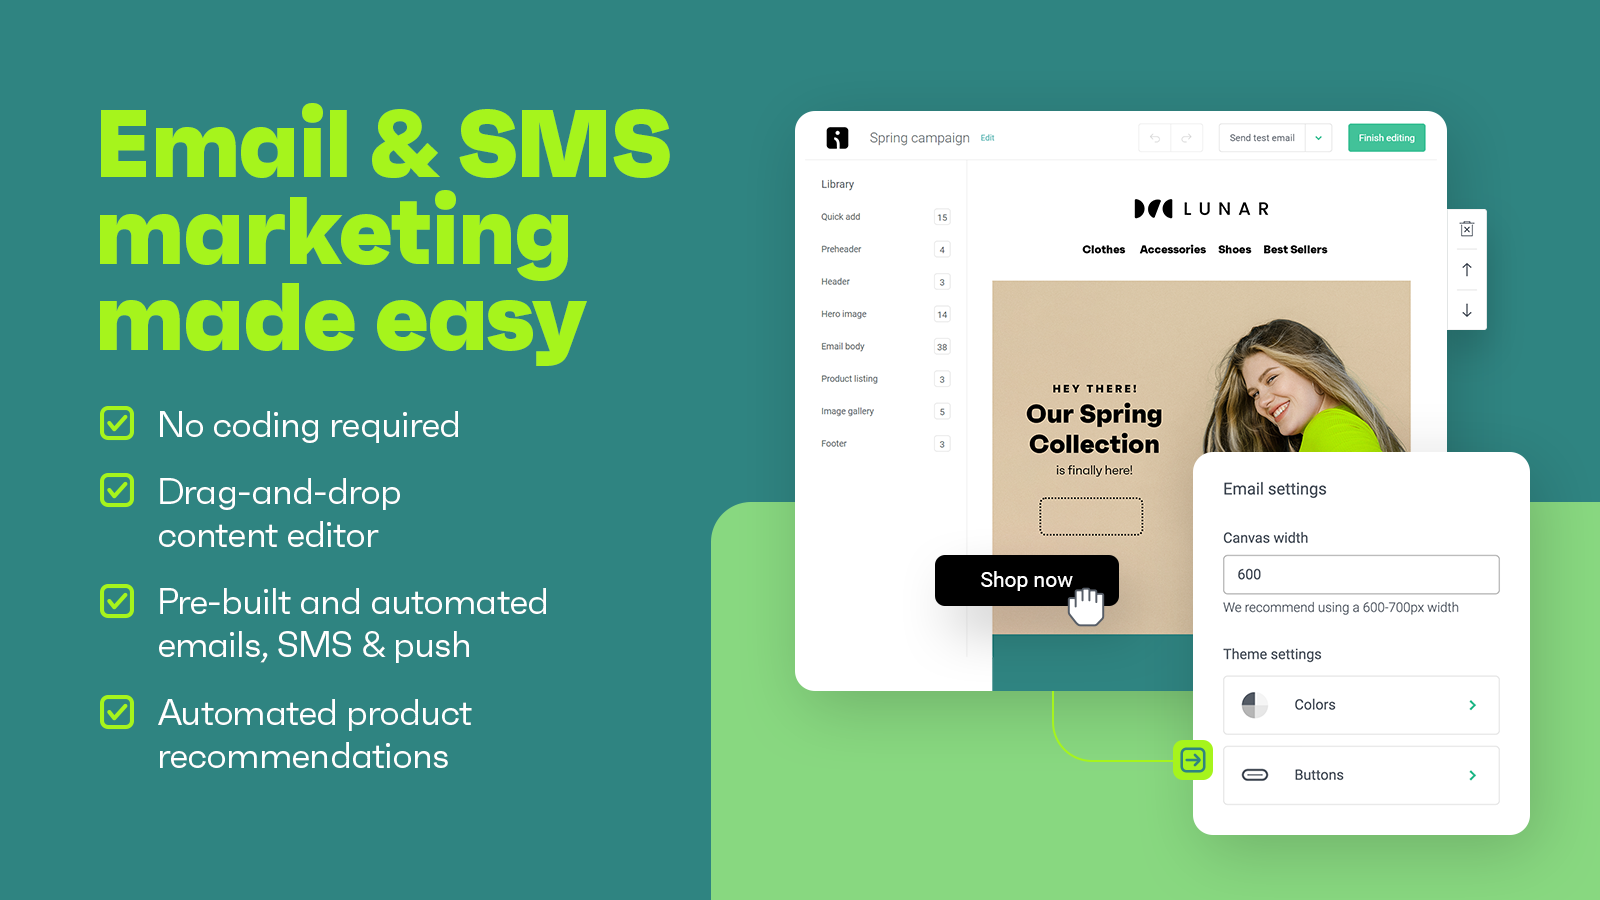 Omnisend Software - Email & SMS marketing made easy